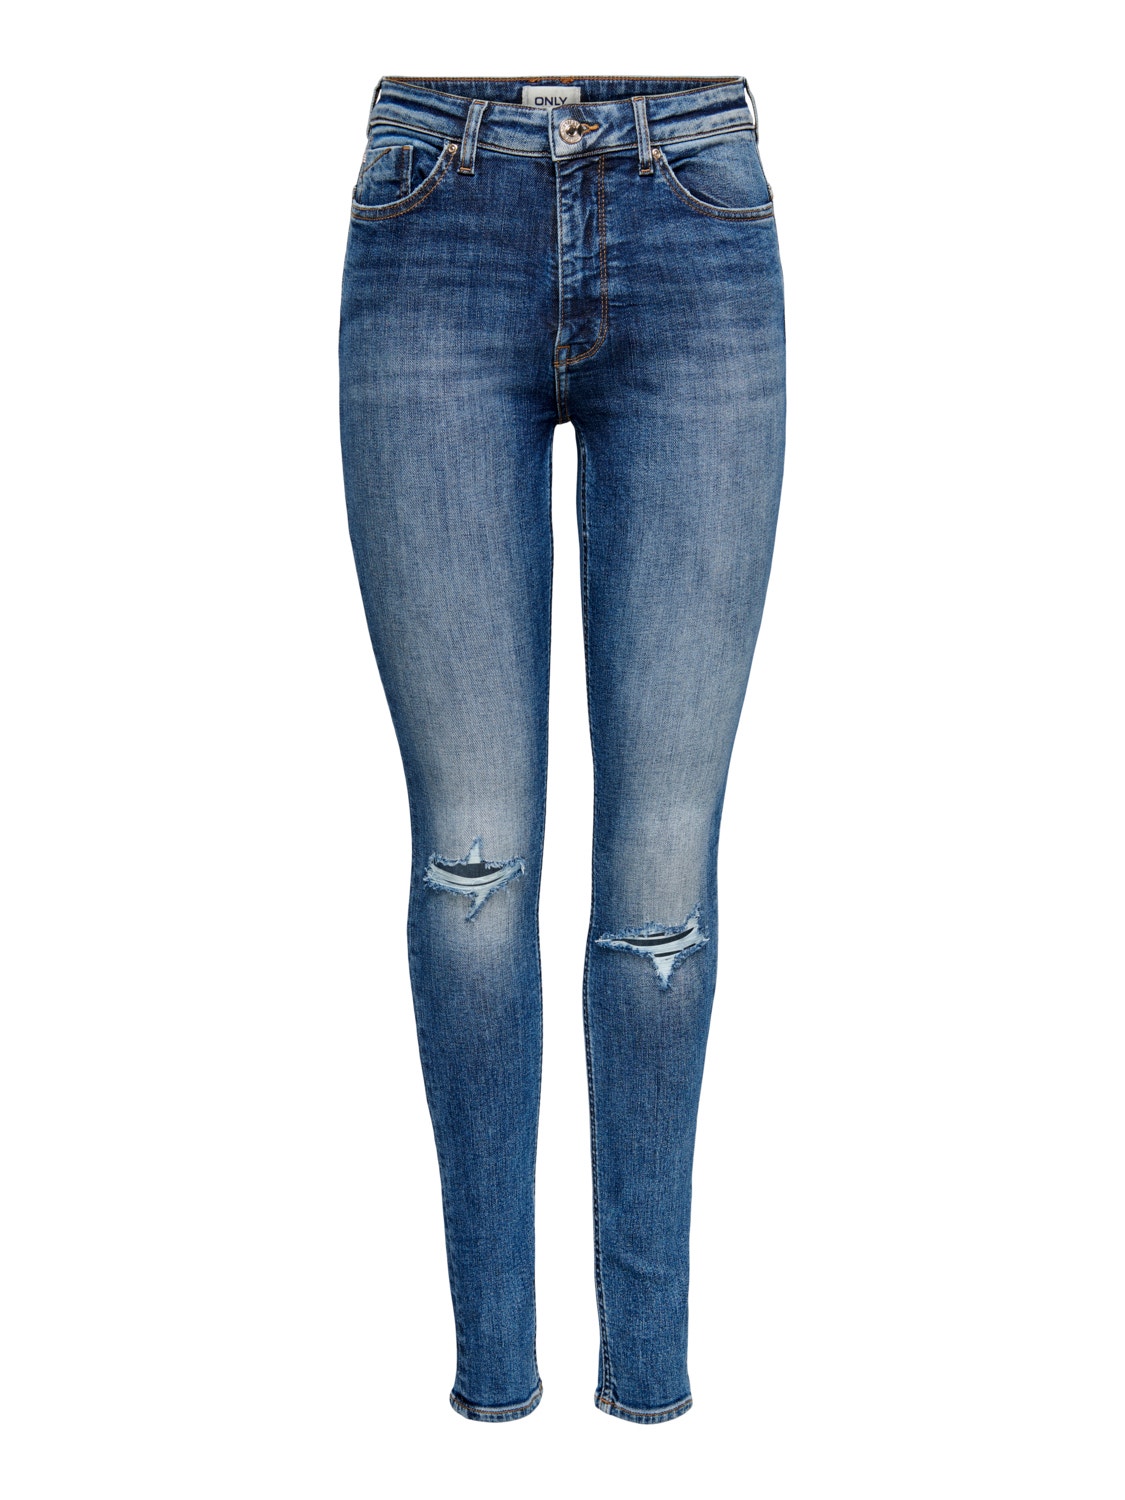 ONLY Skinny Fit Hohe Taille Jeans -Light Medium Blue Denim - 15241943